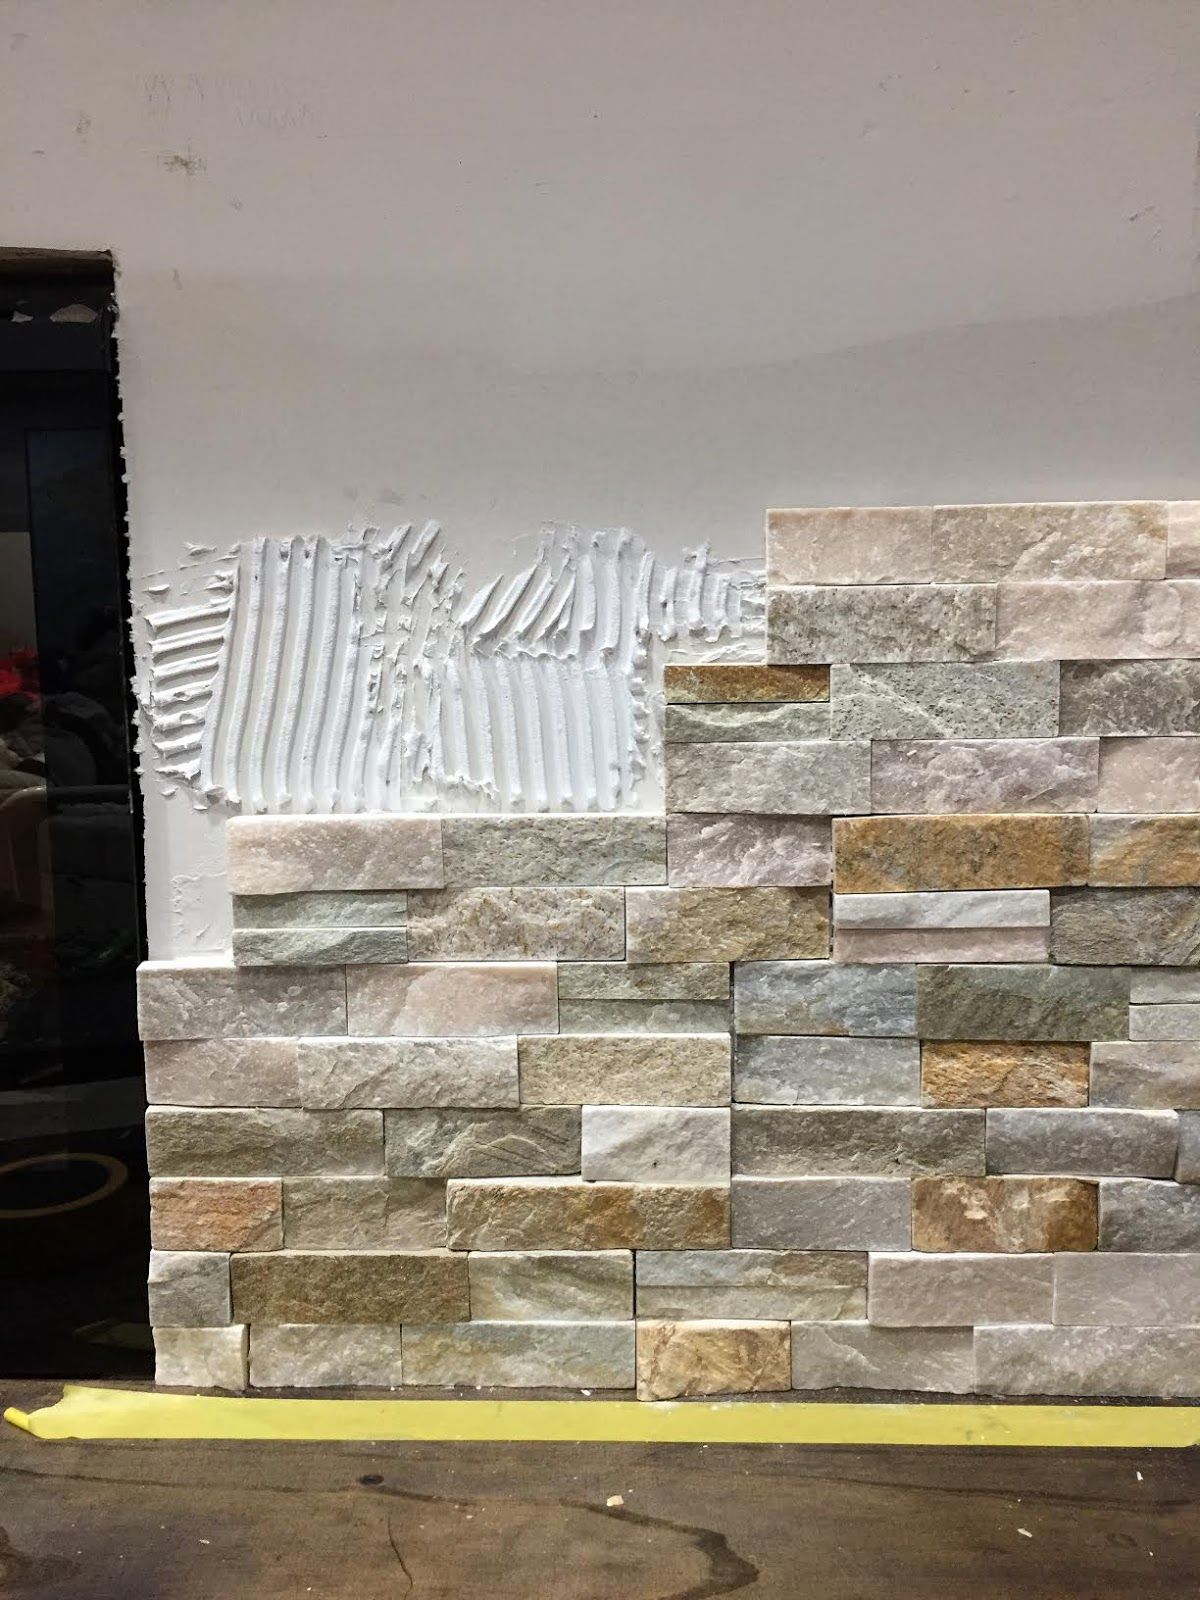 Removing Stone From Fireplace Inspirational How to Install Stacked Stone Tile On A Fireplace Wall